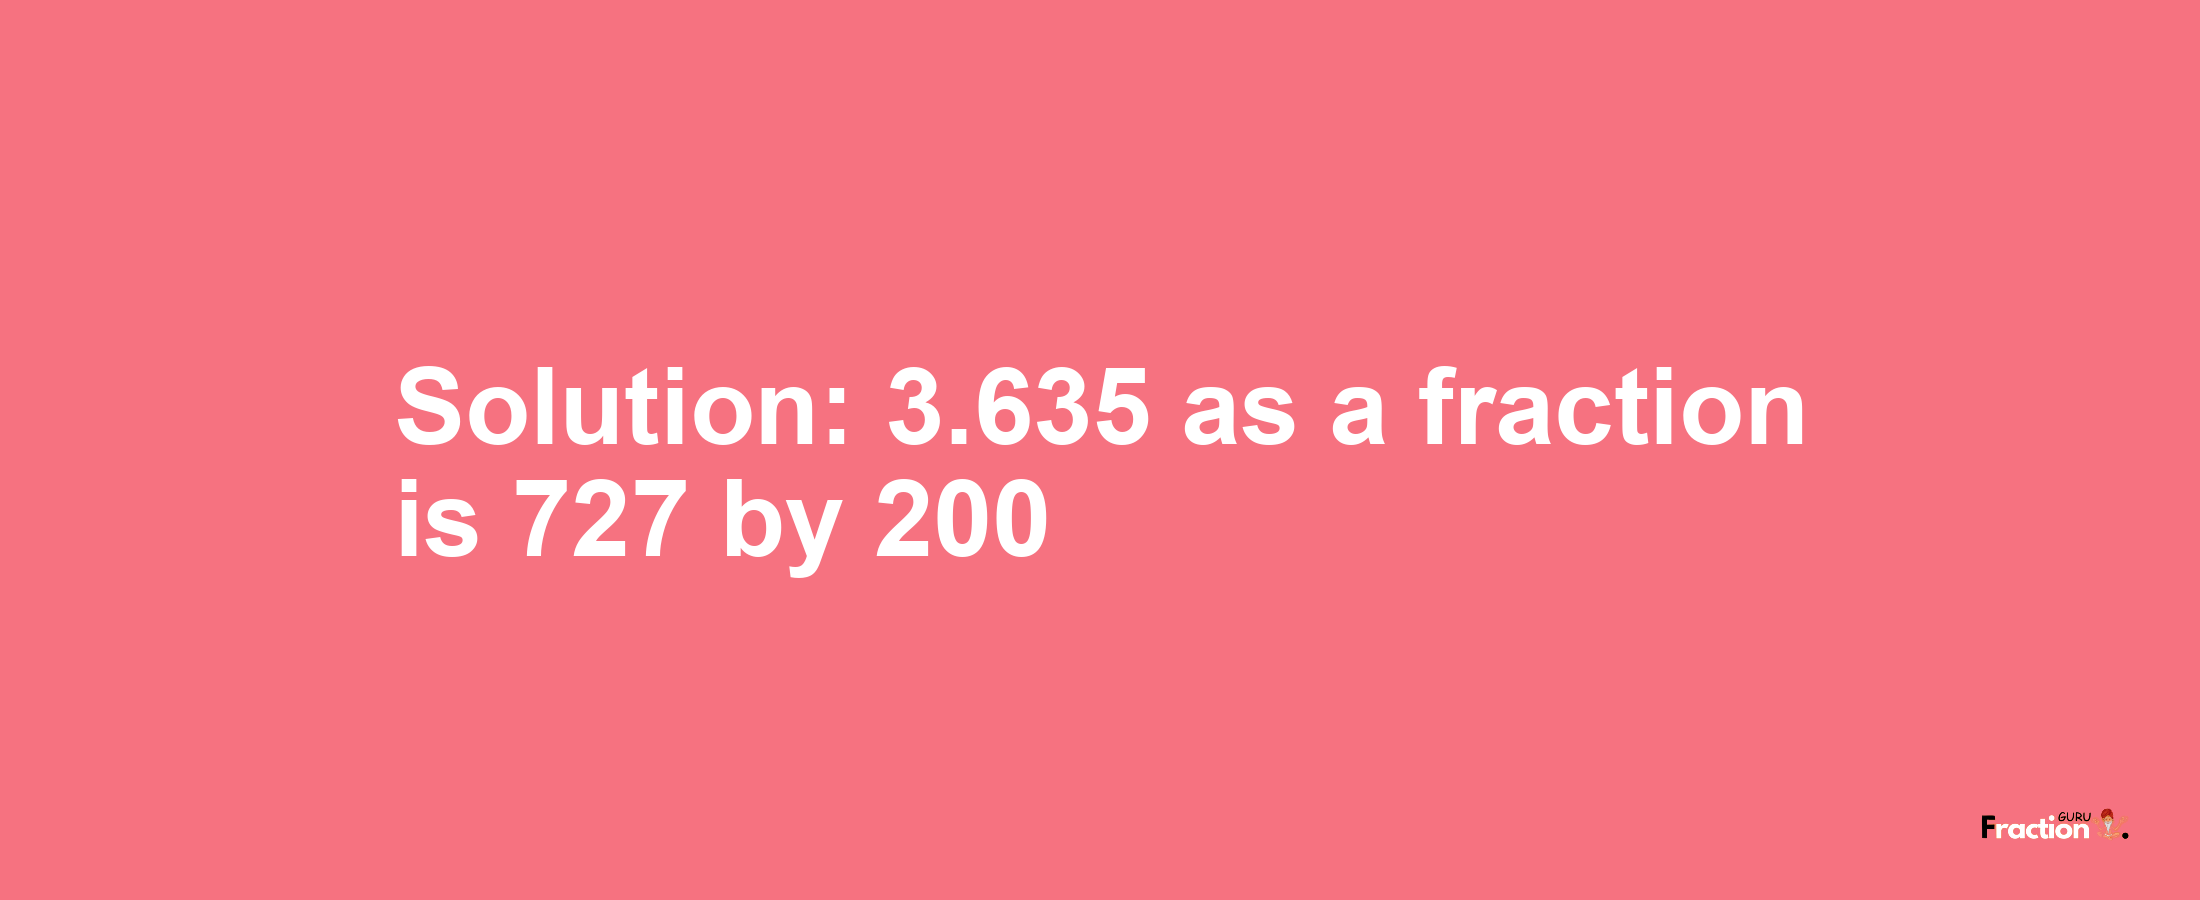 Solution:3.635 as a fraction is 727/200